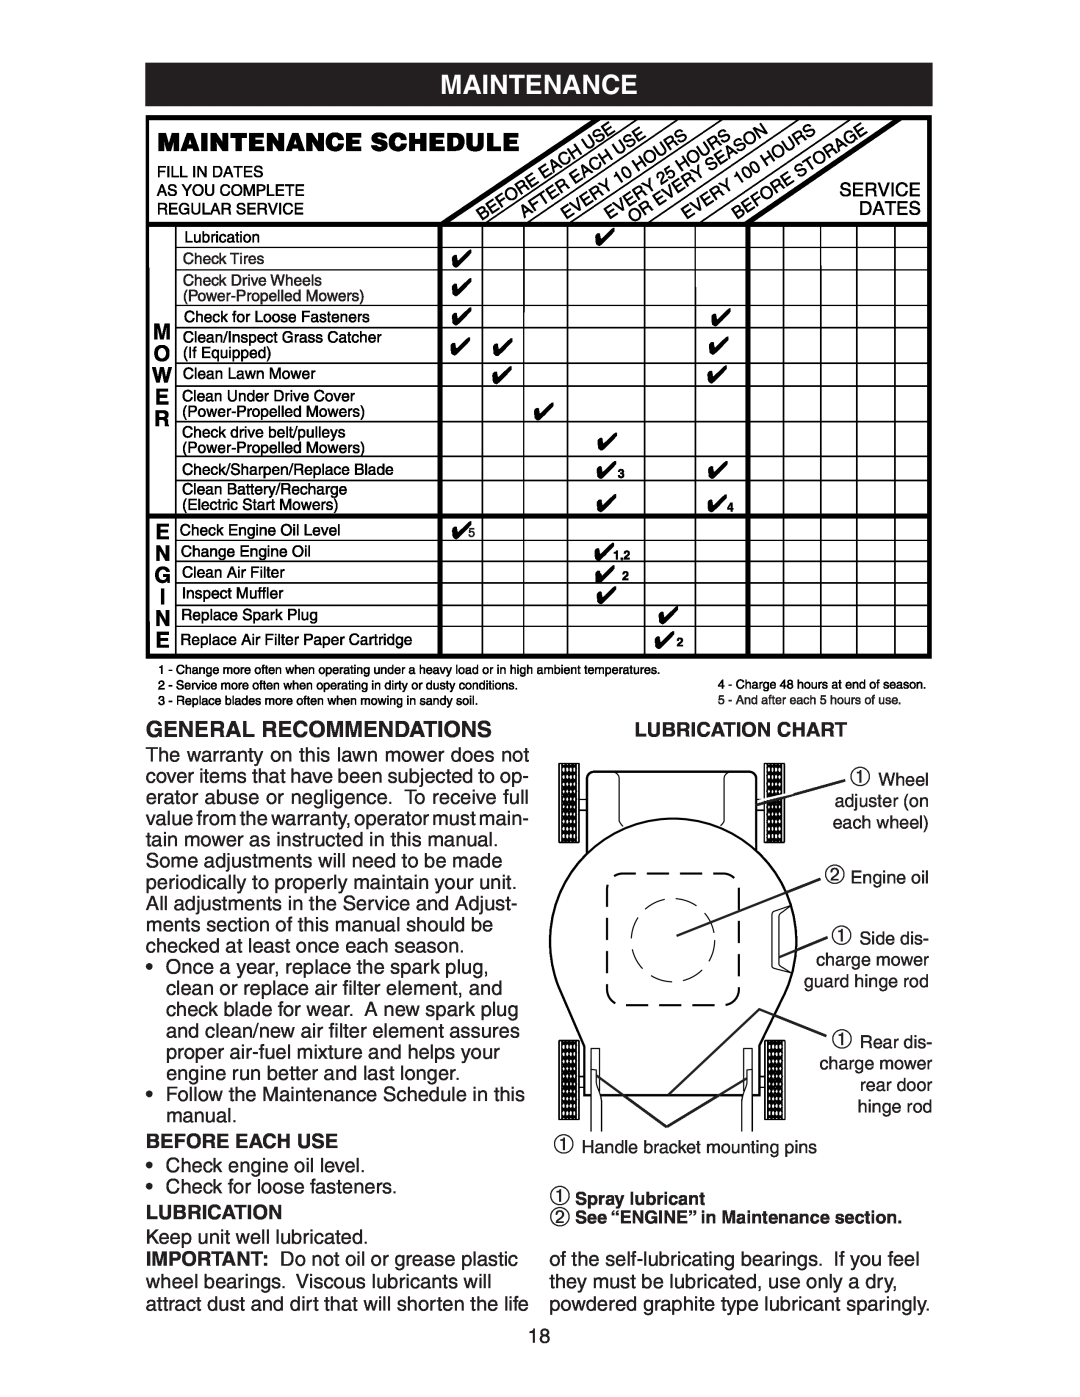 Poulan 172787 manual Maintenance, General Recommendations, Before Each Use, Lubrication Chart 